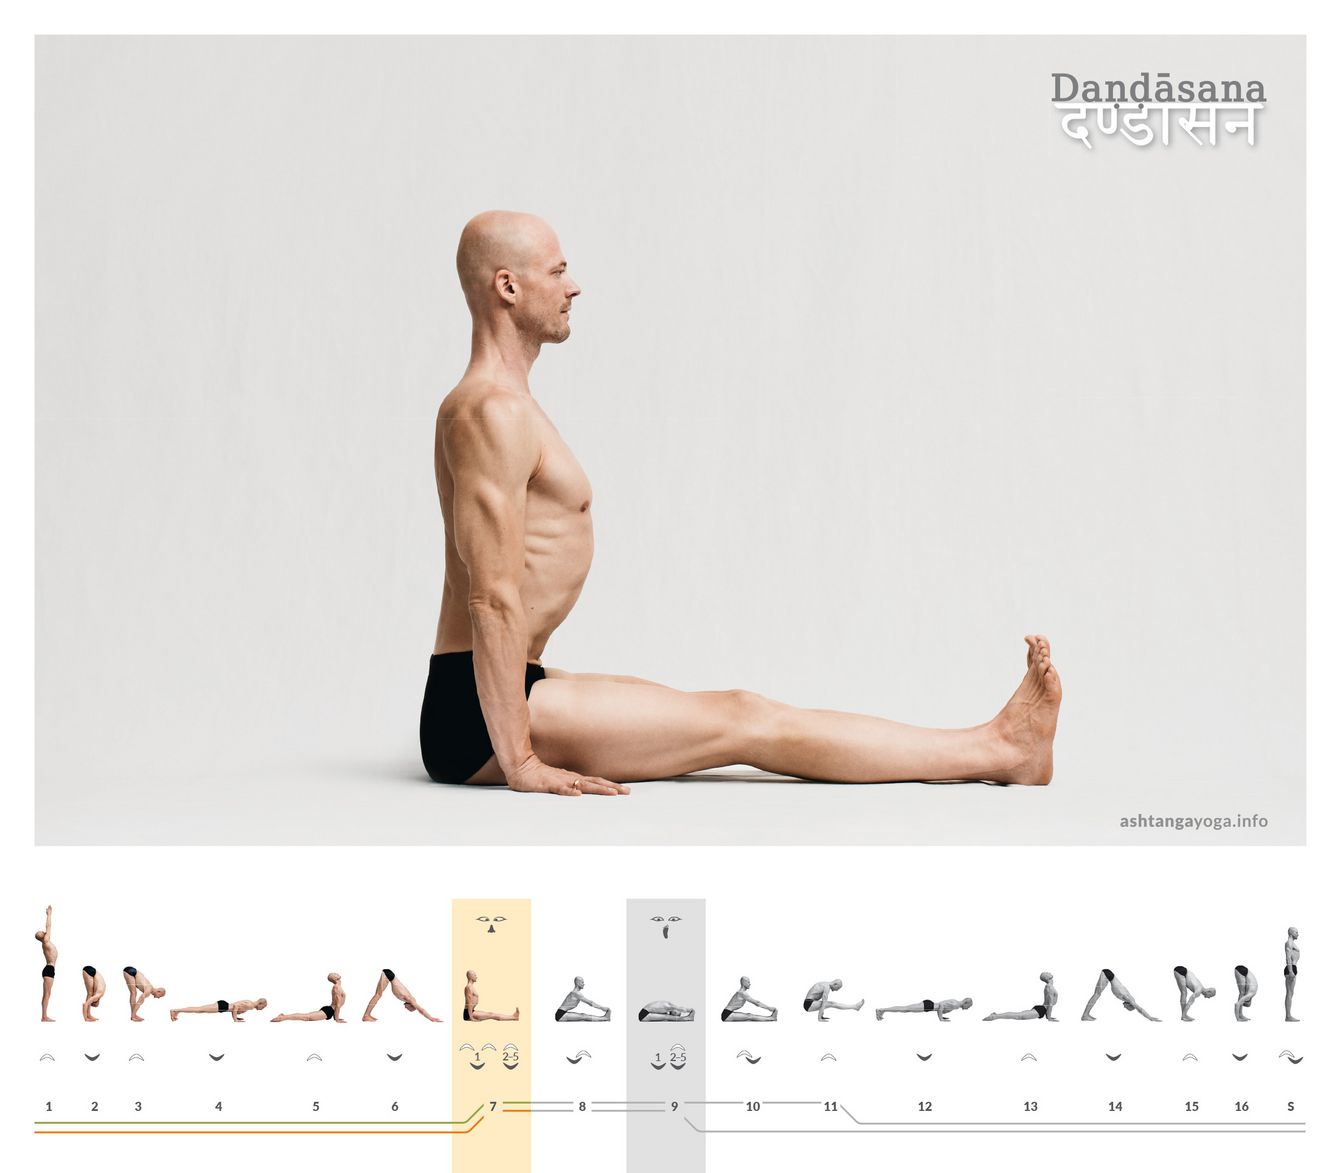 The first seated posture of Ashtanga Yoga Dandasana, the "Staff pose" couldn't be more puristic: you simply sit upright and stretch the legs in front of you. 